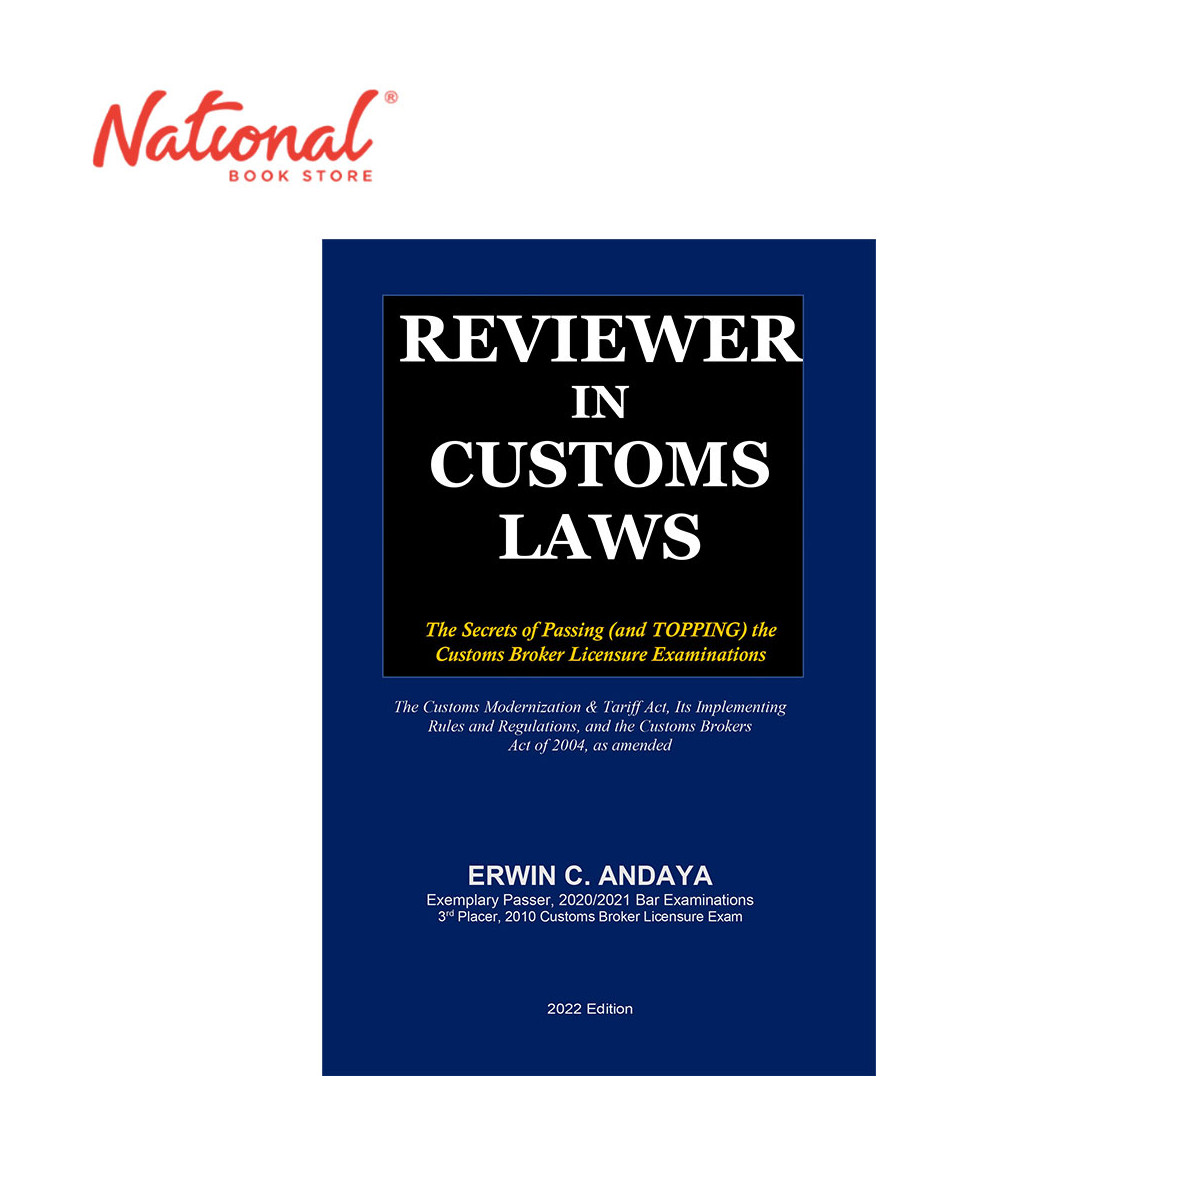 Reviewer in Customs Laws by Erwin C. Andaya - Trade Paperback - College Books